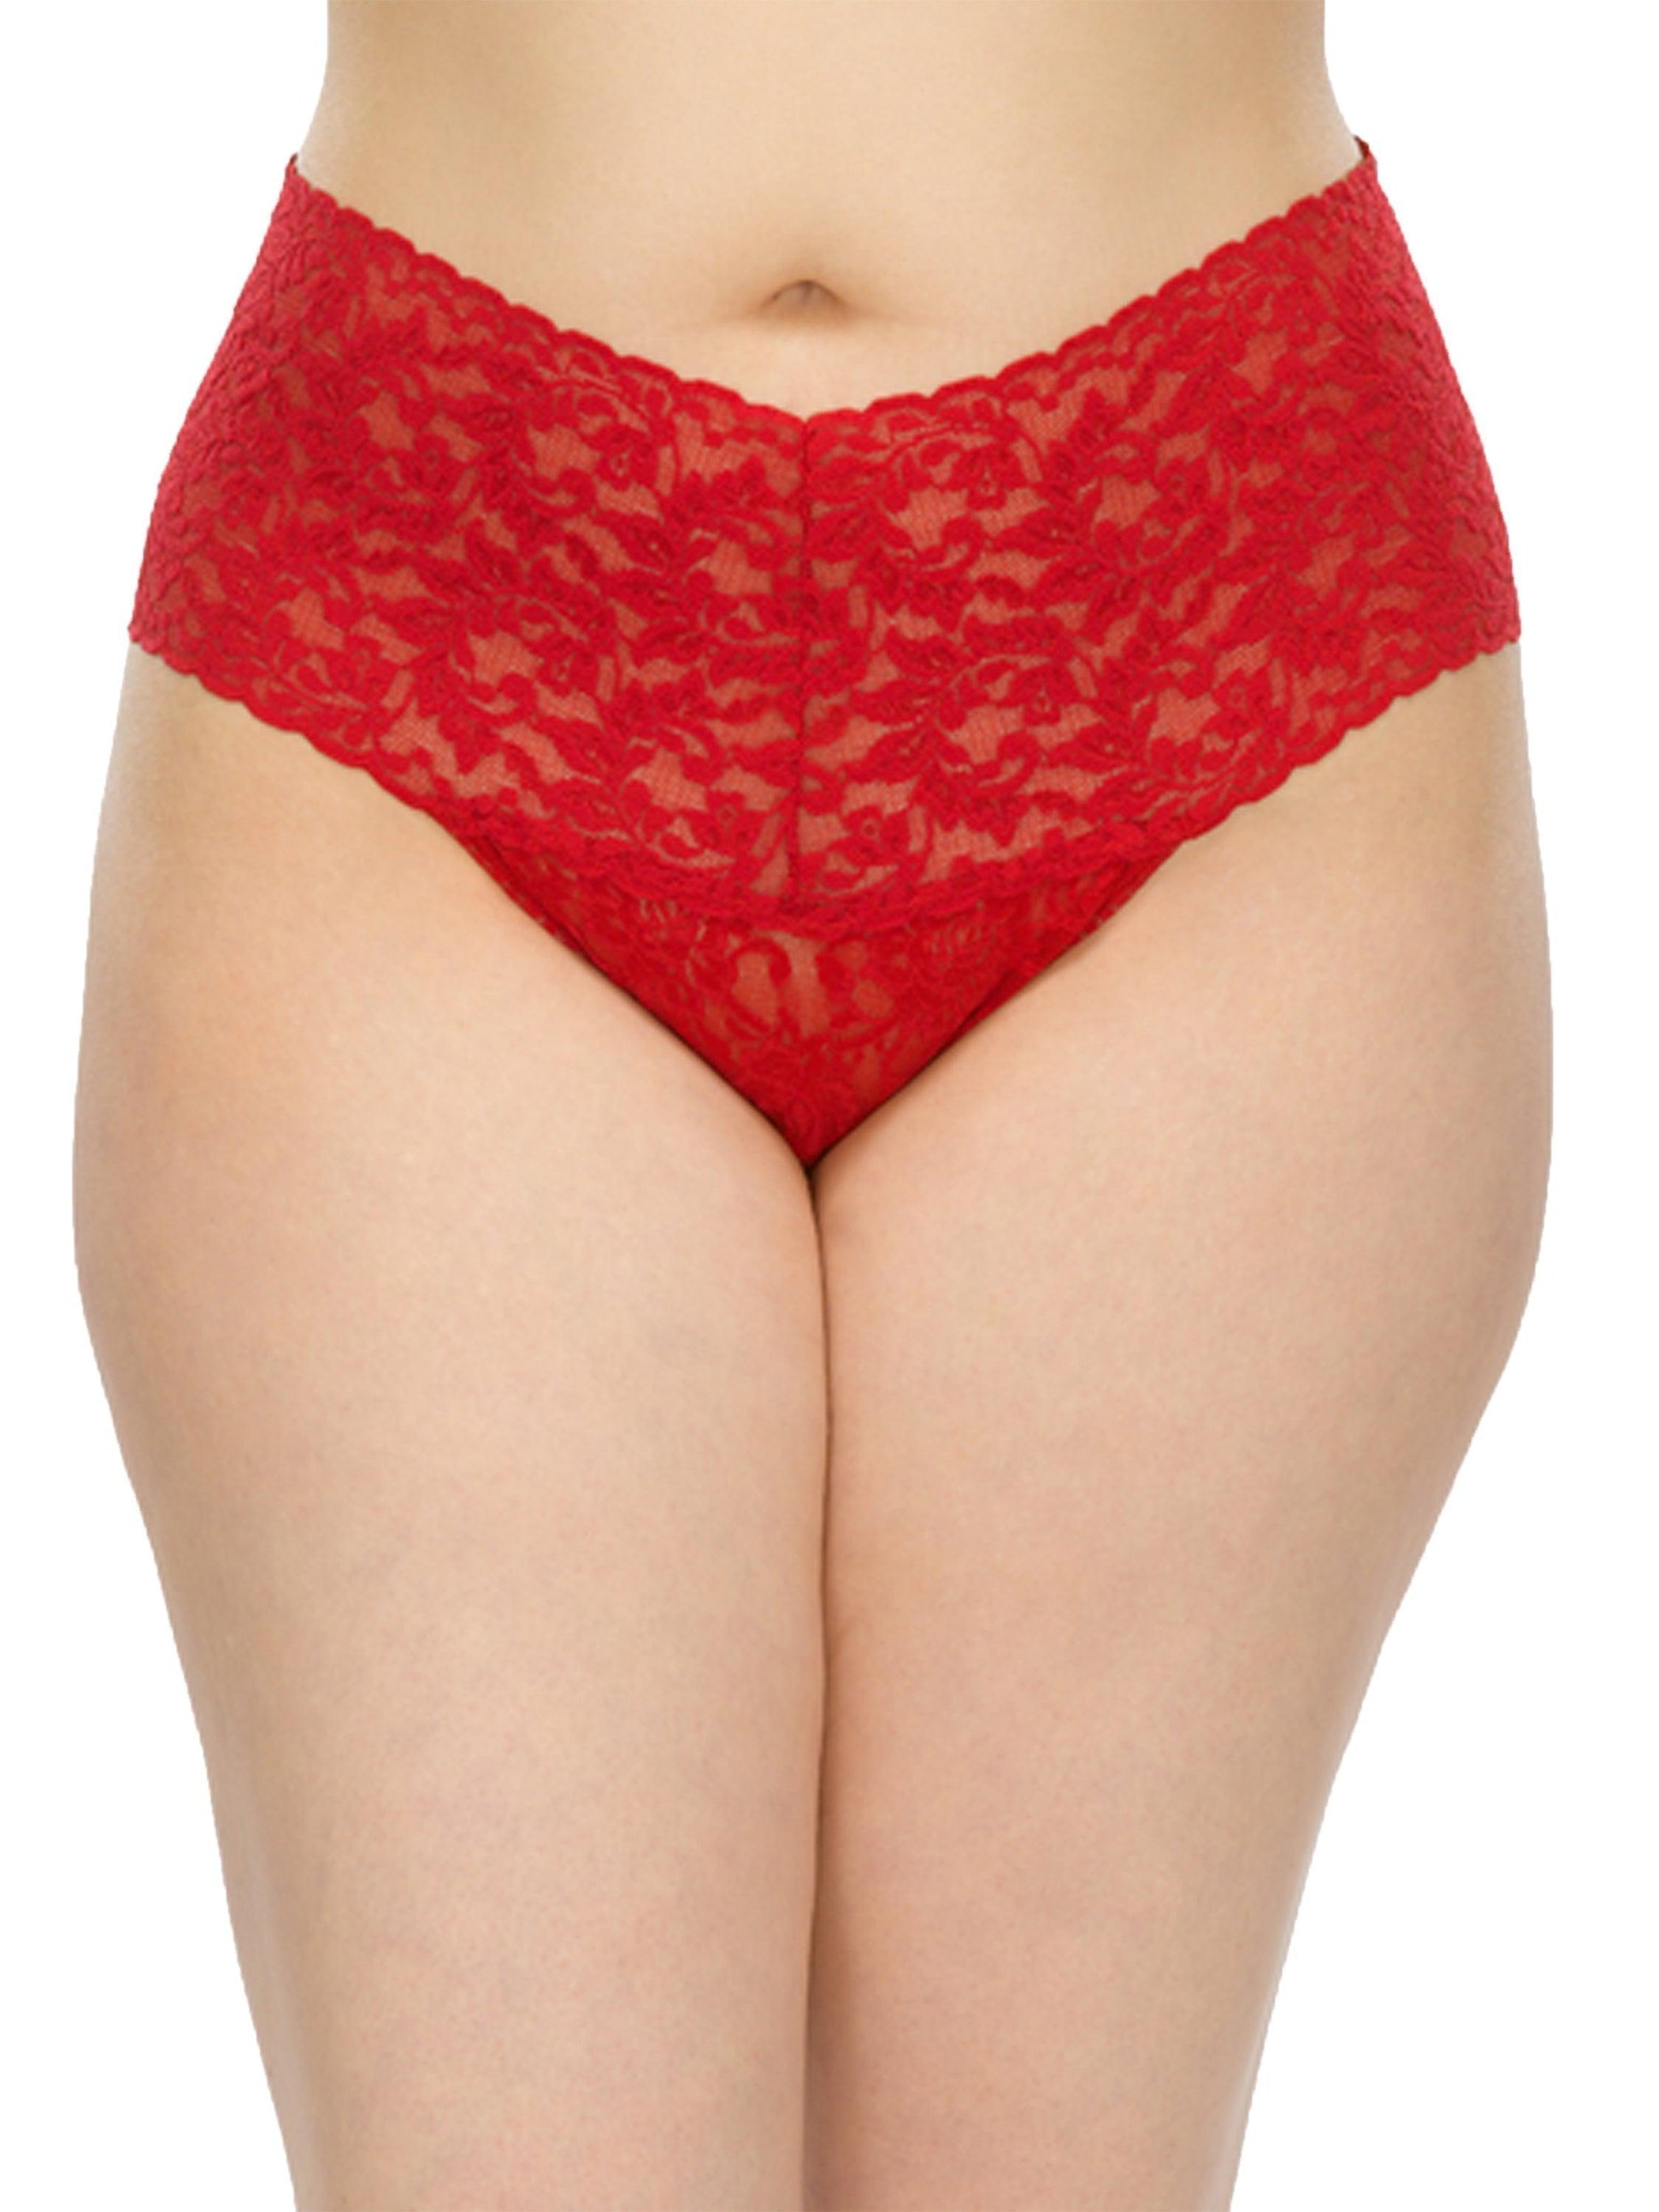 Plus Size Retro Lace Thong-RED-Hanky Panky